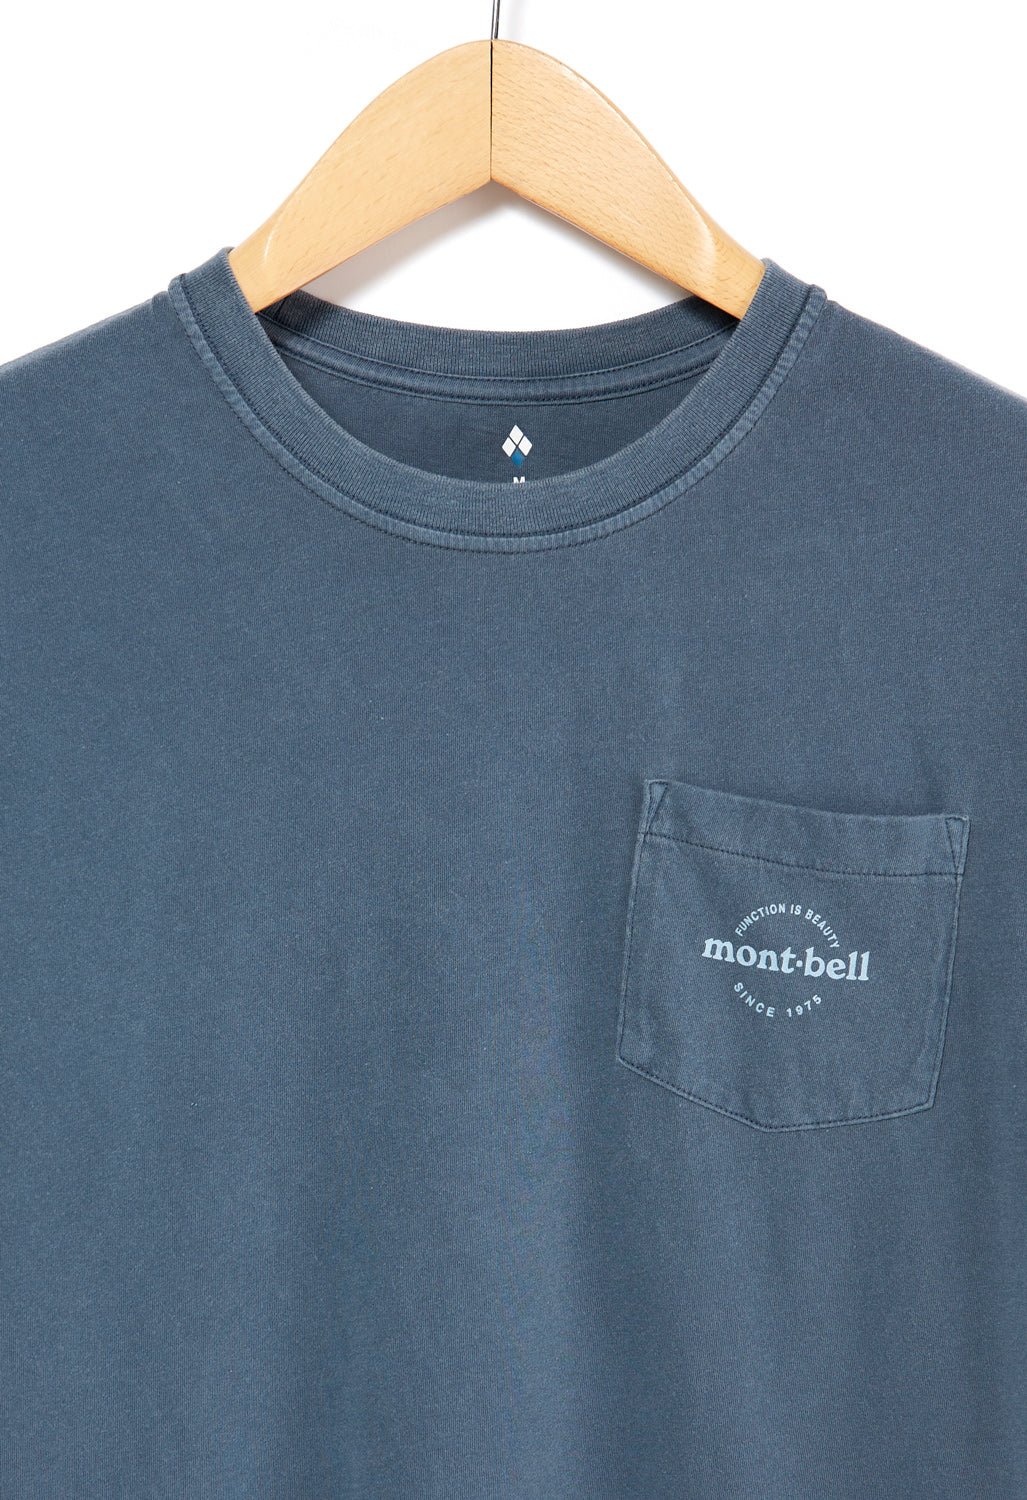 Montbell Men's Wash Out Cotton T-Shirt - Navy